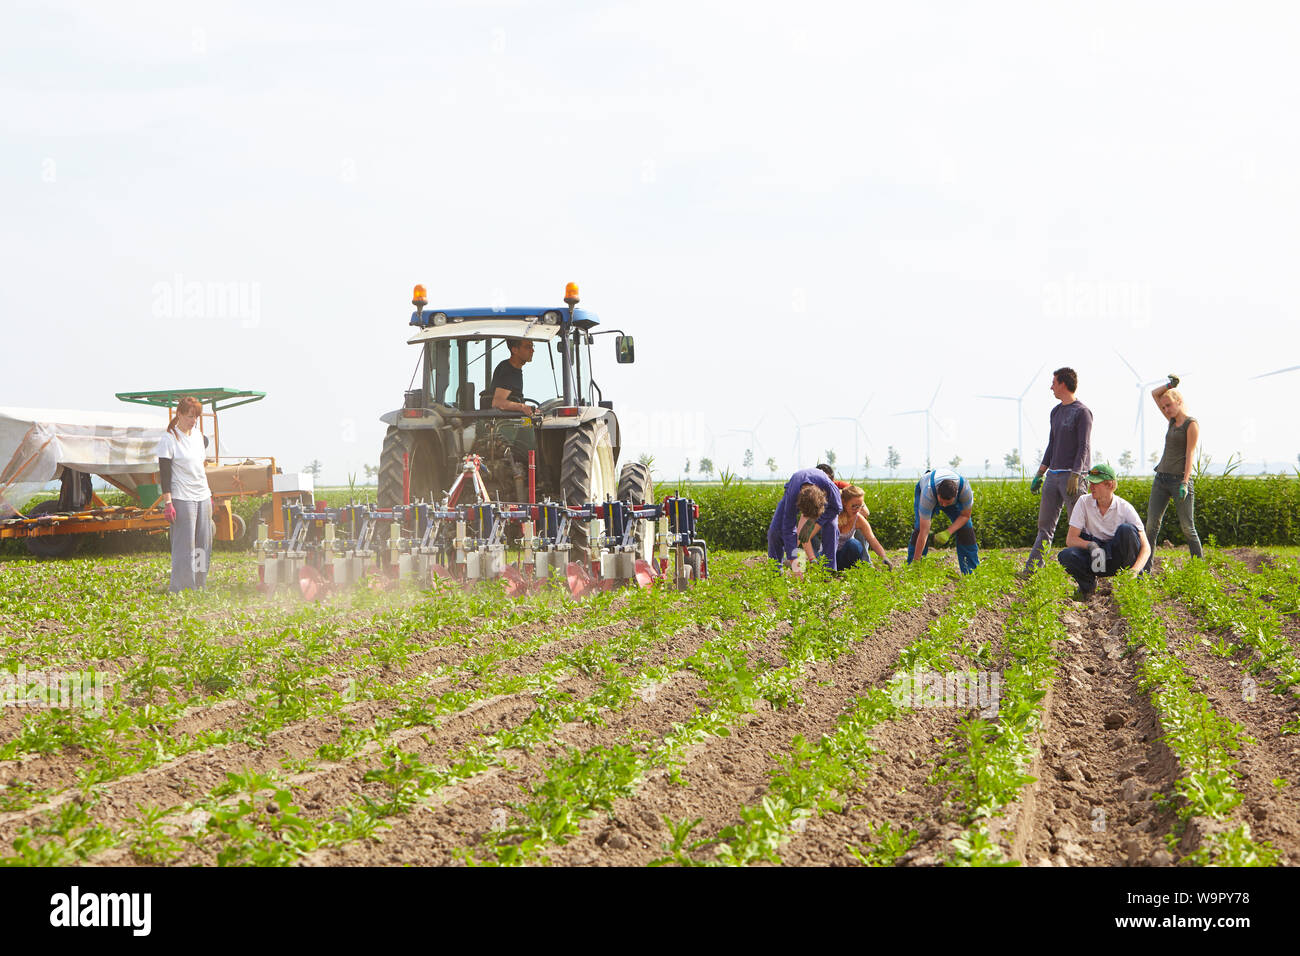 Tractor with driver and team of mixed gender migrant farm labourers working in a field of organically grown chicory on a commercial agricultural farm Stock Photo